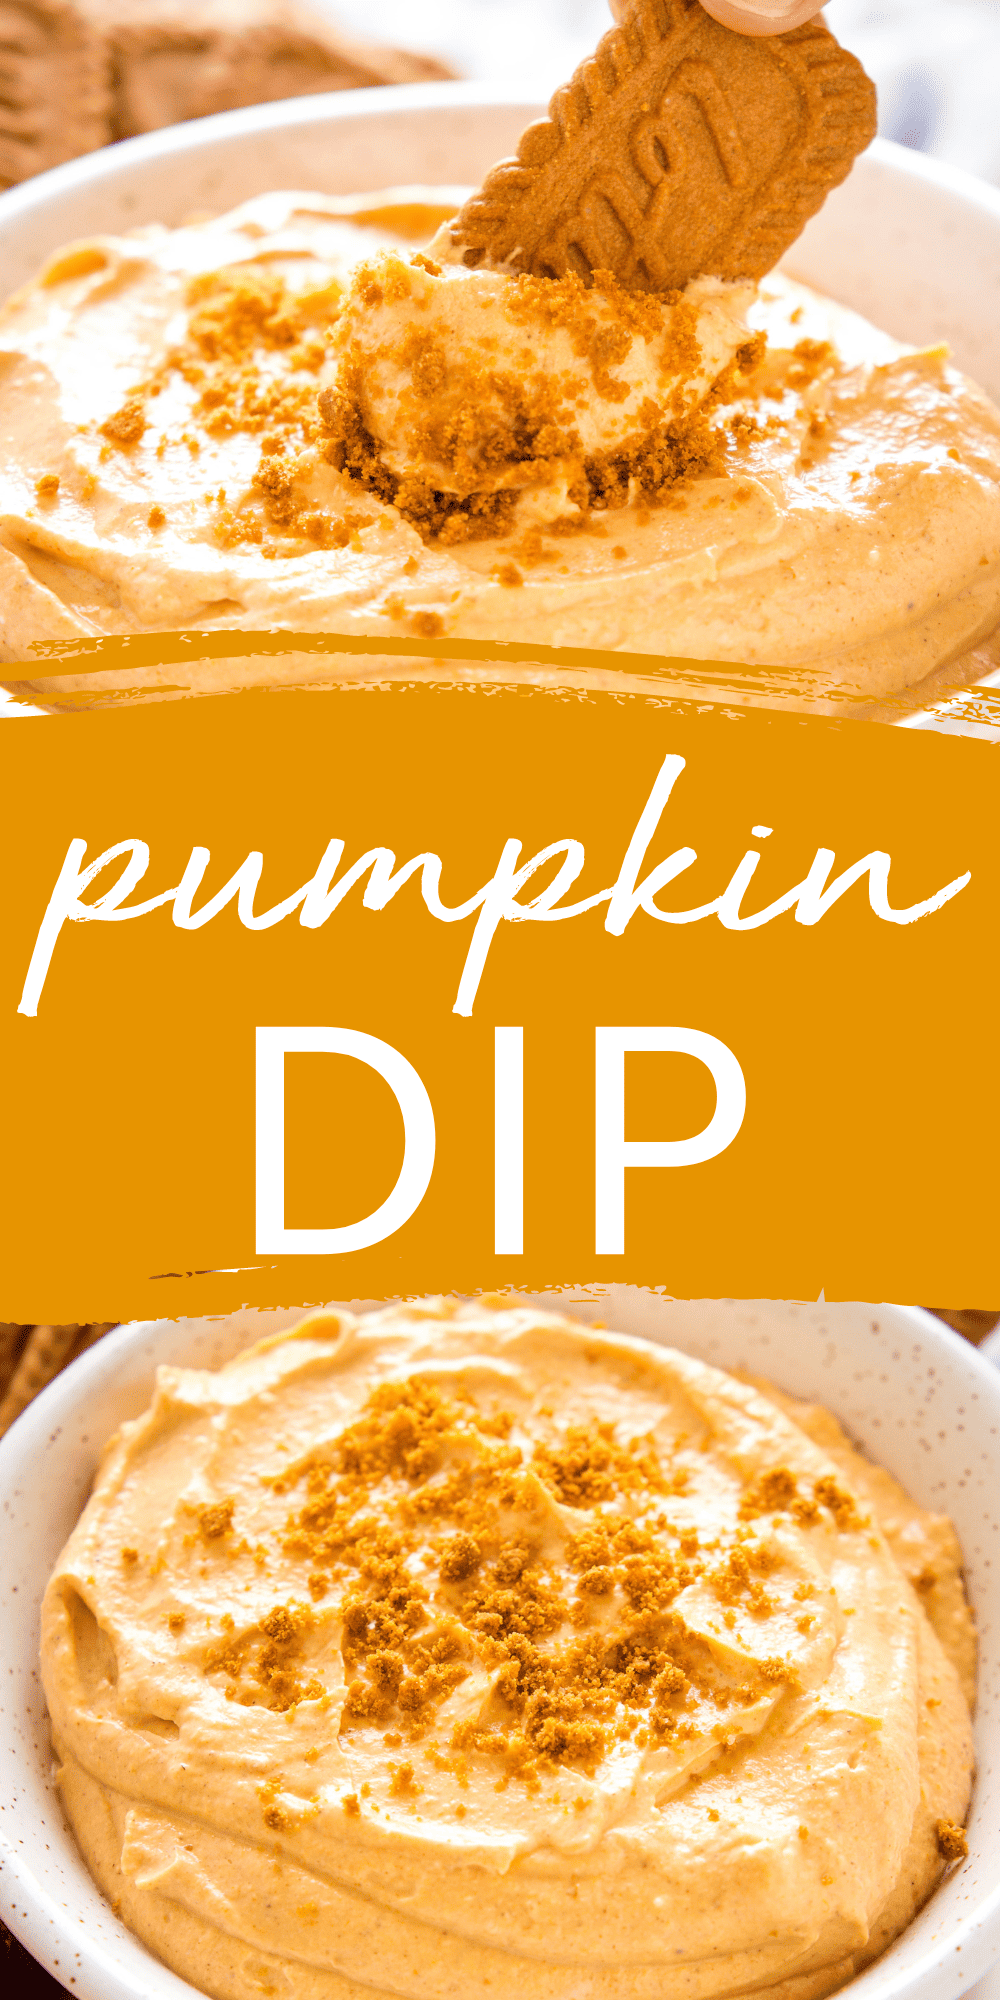 This Pumpkin Dip recipe is an easy-to-make fall dessert dip perfect autumn or holiday parties. Make it in minutes with only 5 basic ingredients - perfect for dipping with fruit or cookies! Recipe from thebusybaker.ca! #pumpkindip #pumpkindessert #pumpkinrecipe #dessertdip #pumpkin #falldessert #fallrecipe #pumpkinspice #pumpkinfluff #pumpkincreamcheesedip via @busybakerblog